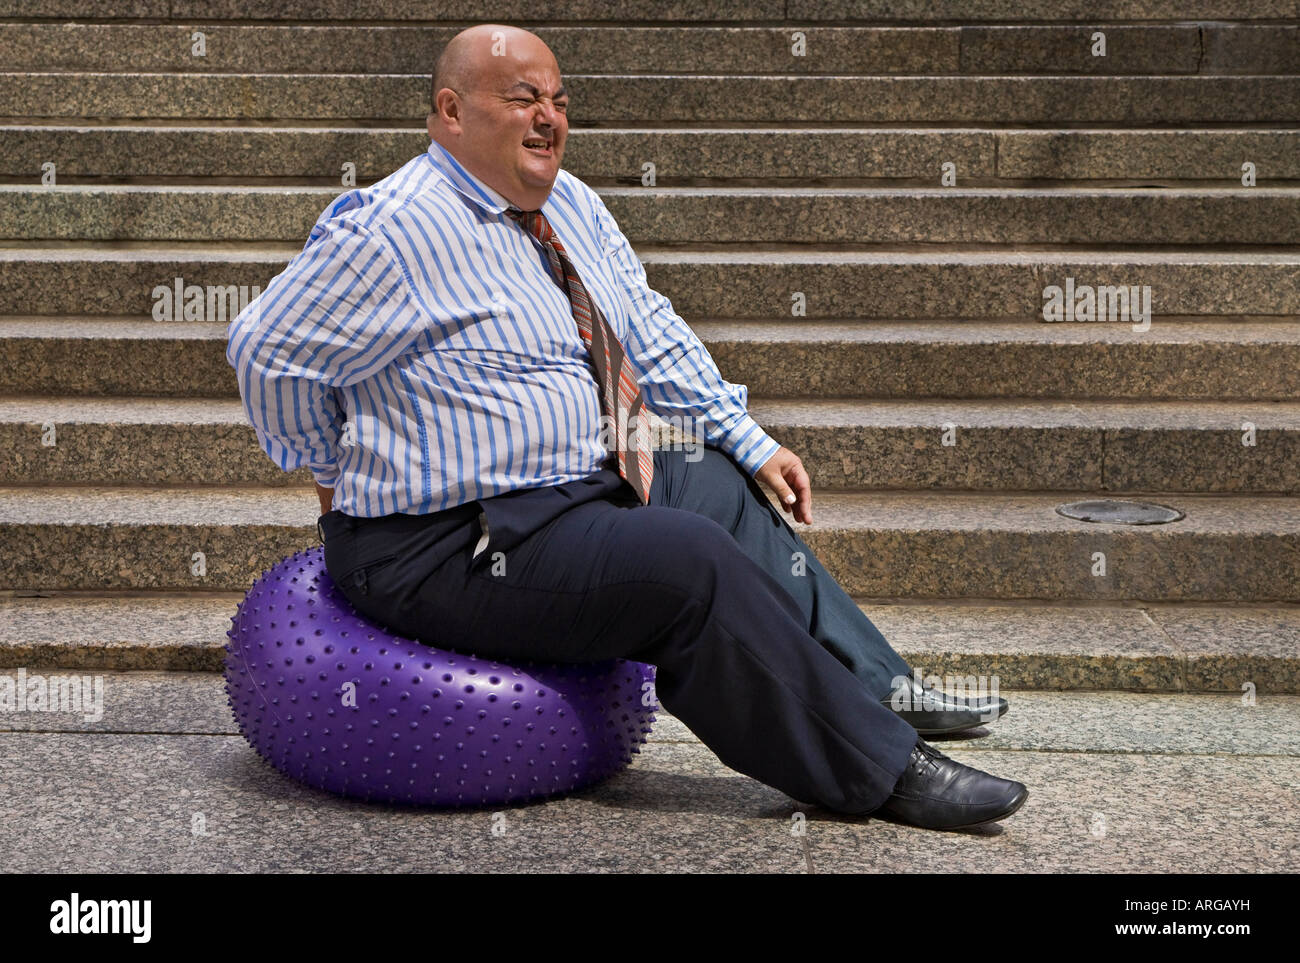 exercise ball for heavy person